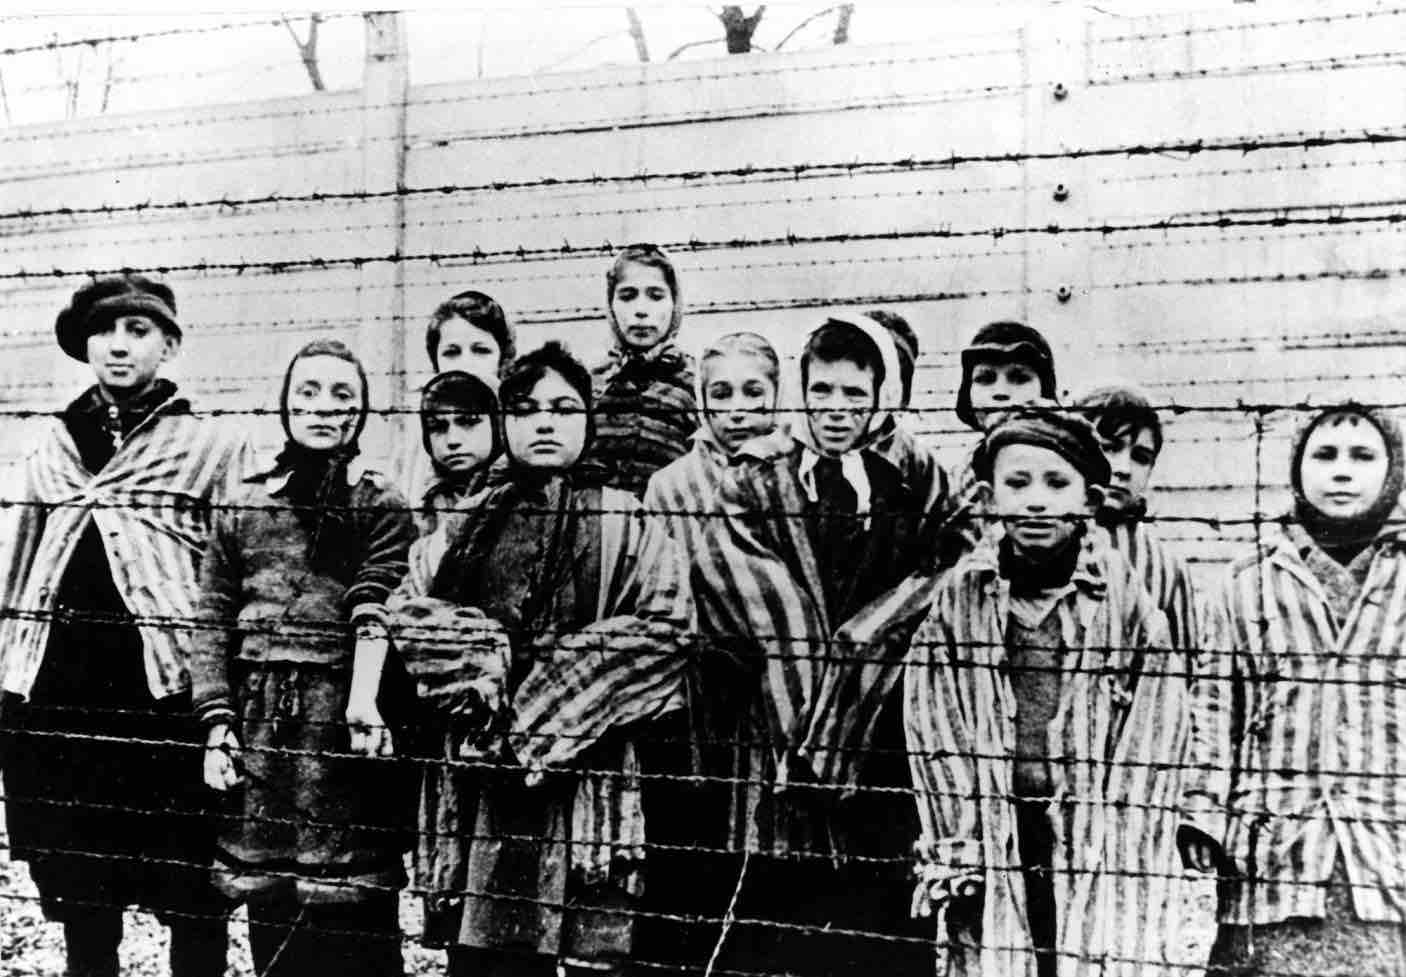 a-group-of-children-stand-behind-the-barbed-wire-fence-at-auschwitz-just-after-the-death-camp-was-liberated-by-the-soviet-army-in-january-1945-ap